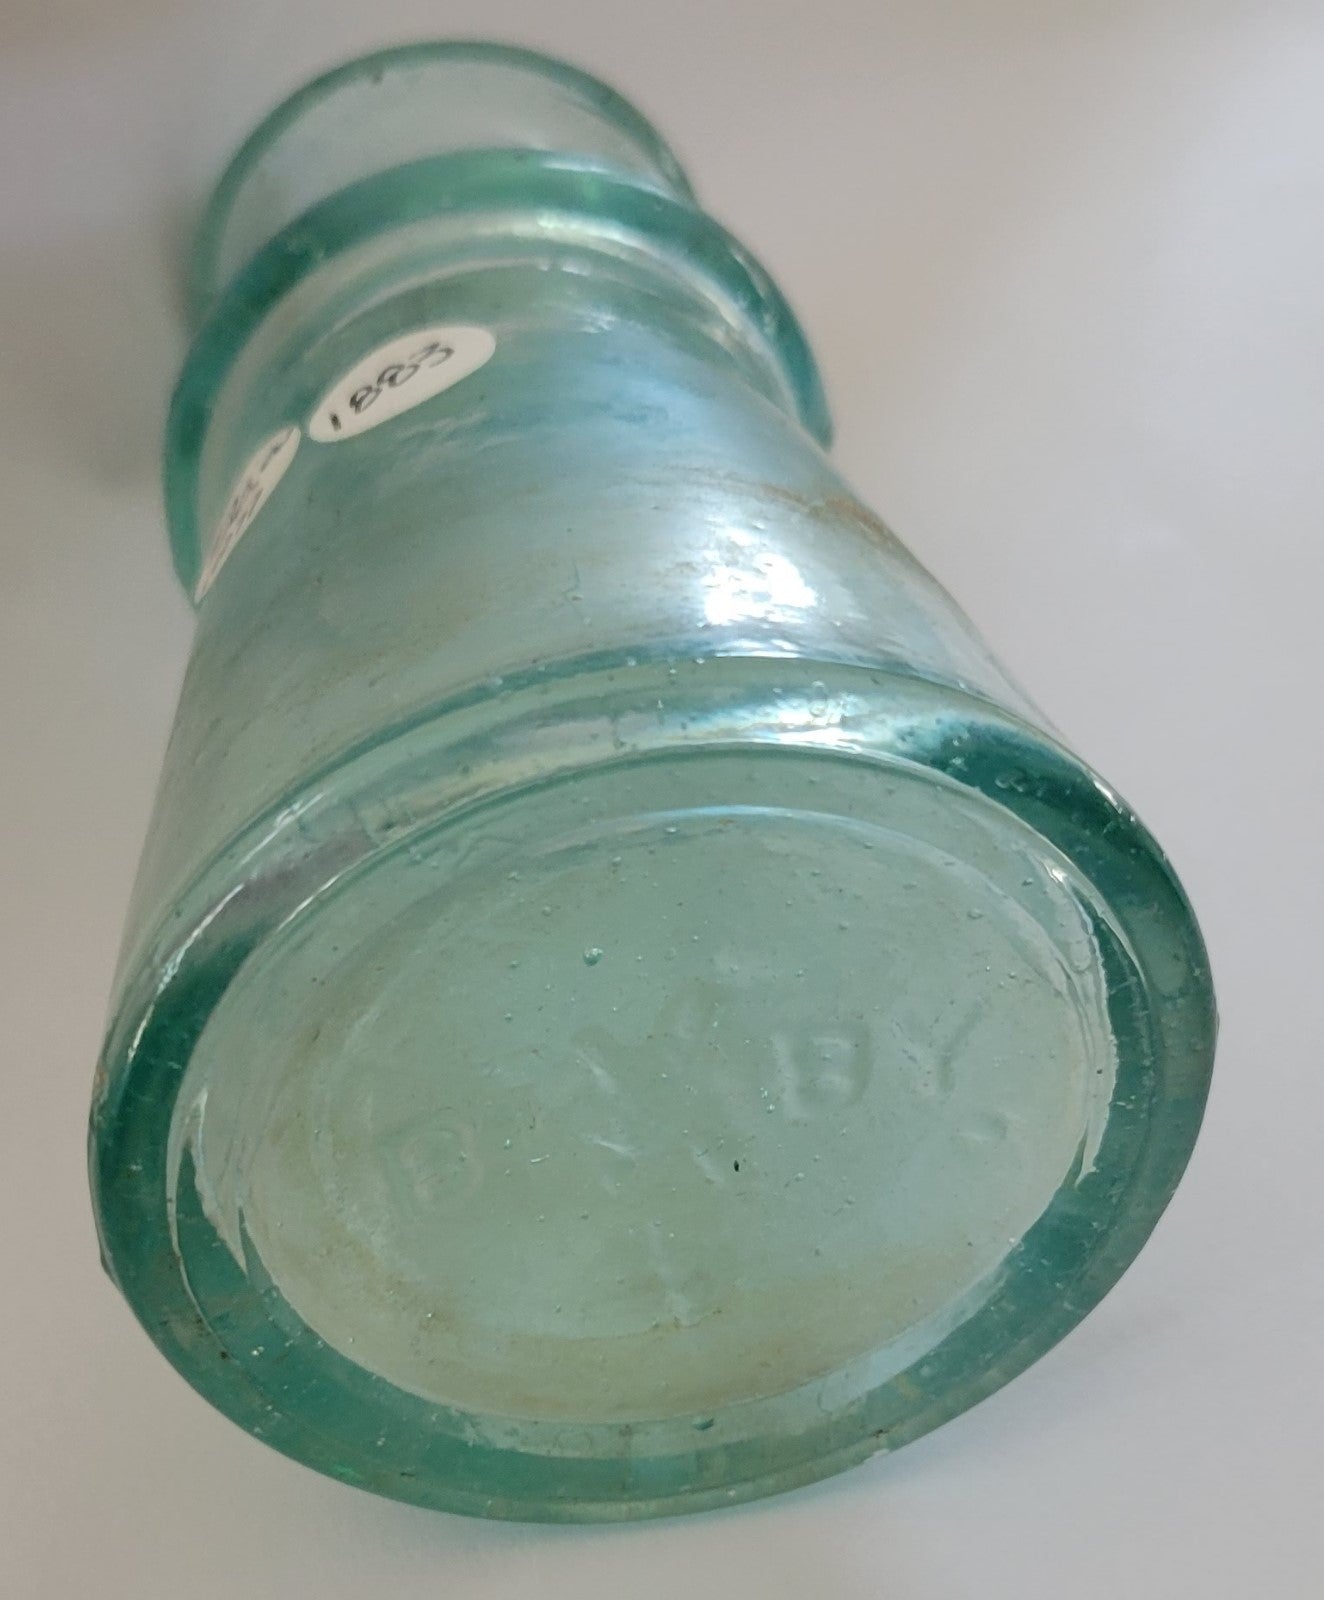 This thick aqua ink bottle was made by Bixby in 1883.  The bottom has the Bixby name and on the side is "Patented Mch. 6. 83" Bottom view.